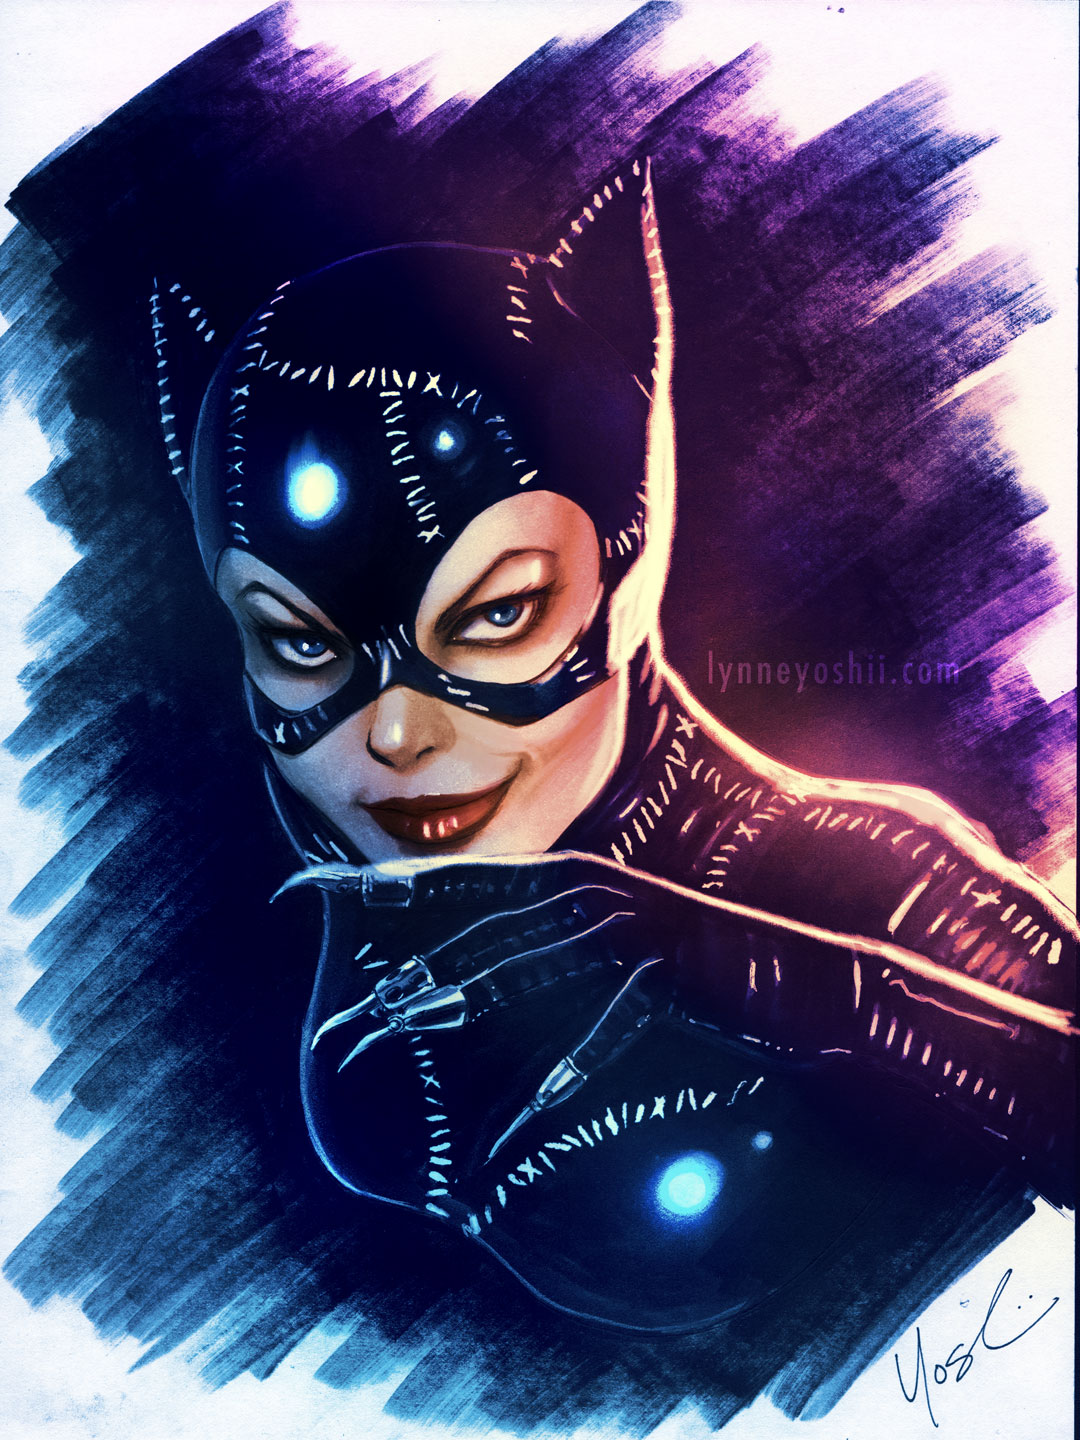 Catwoman '92 color